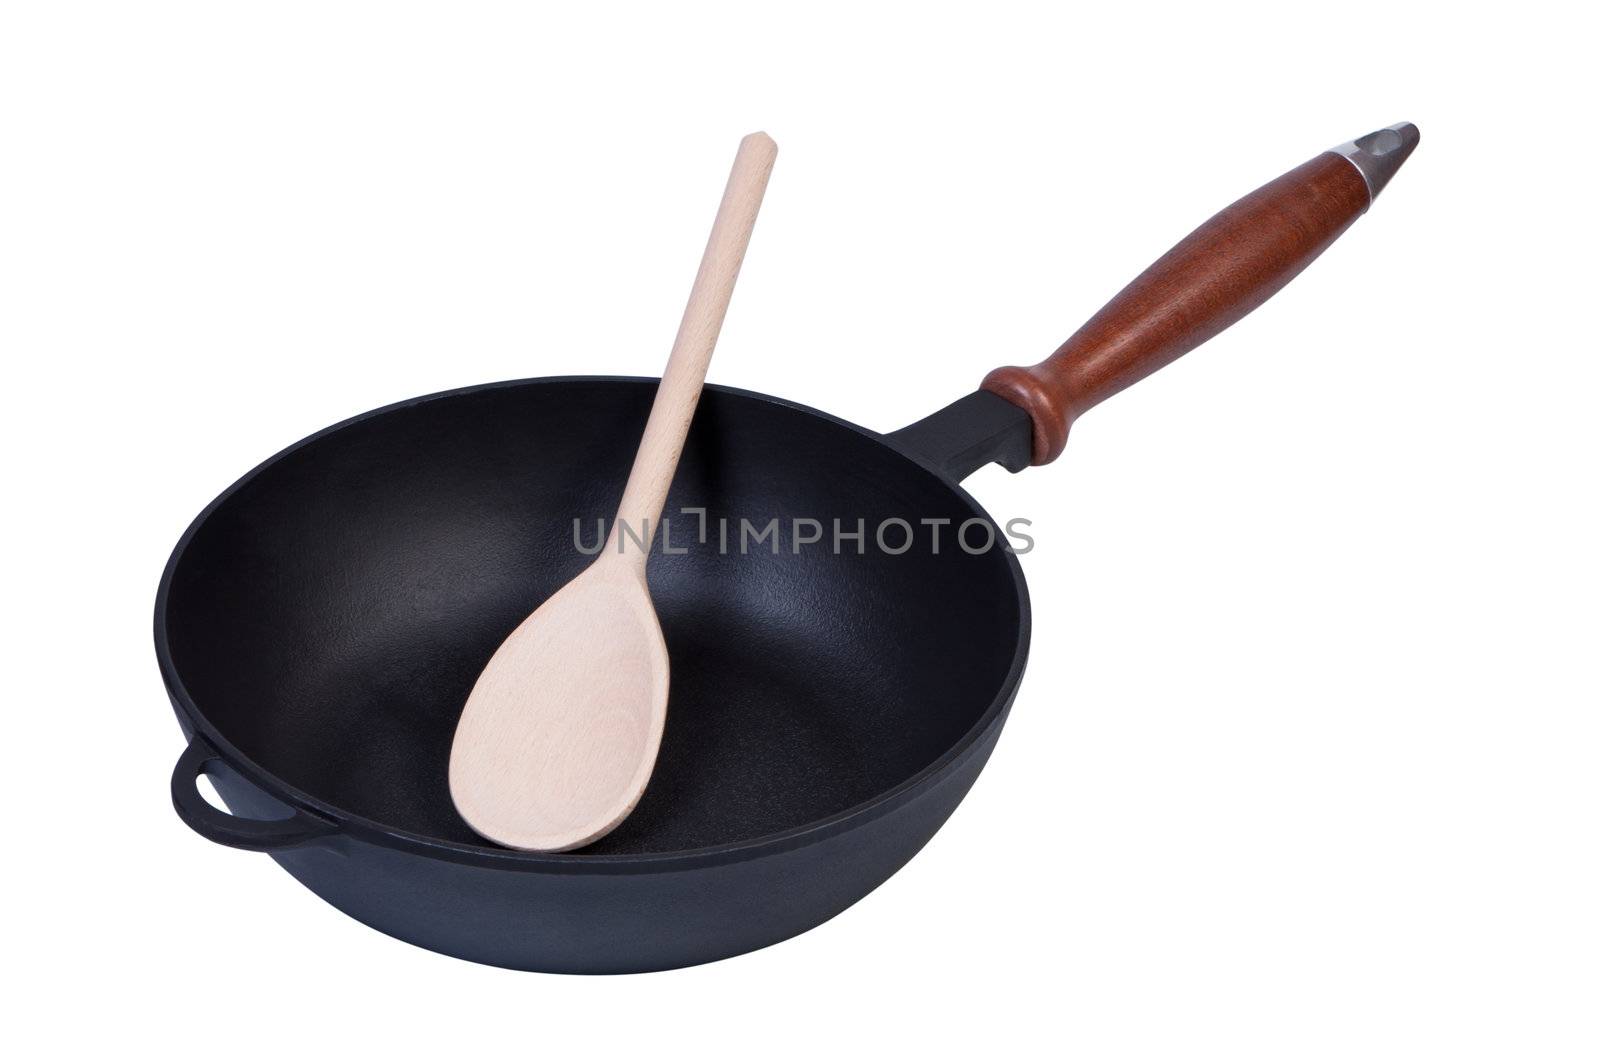 Frying pan on white background with wooden spoon inside.